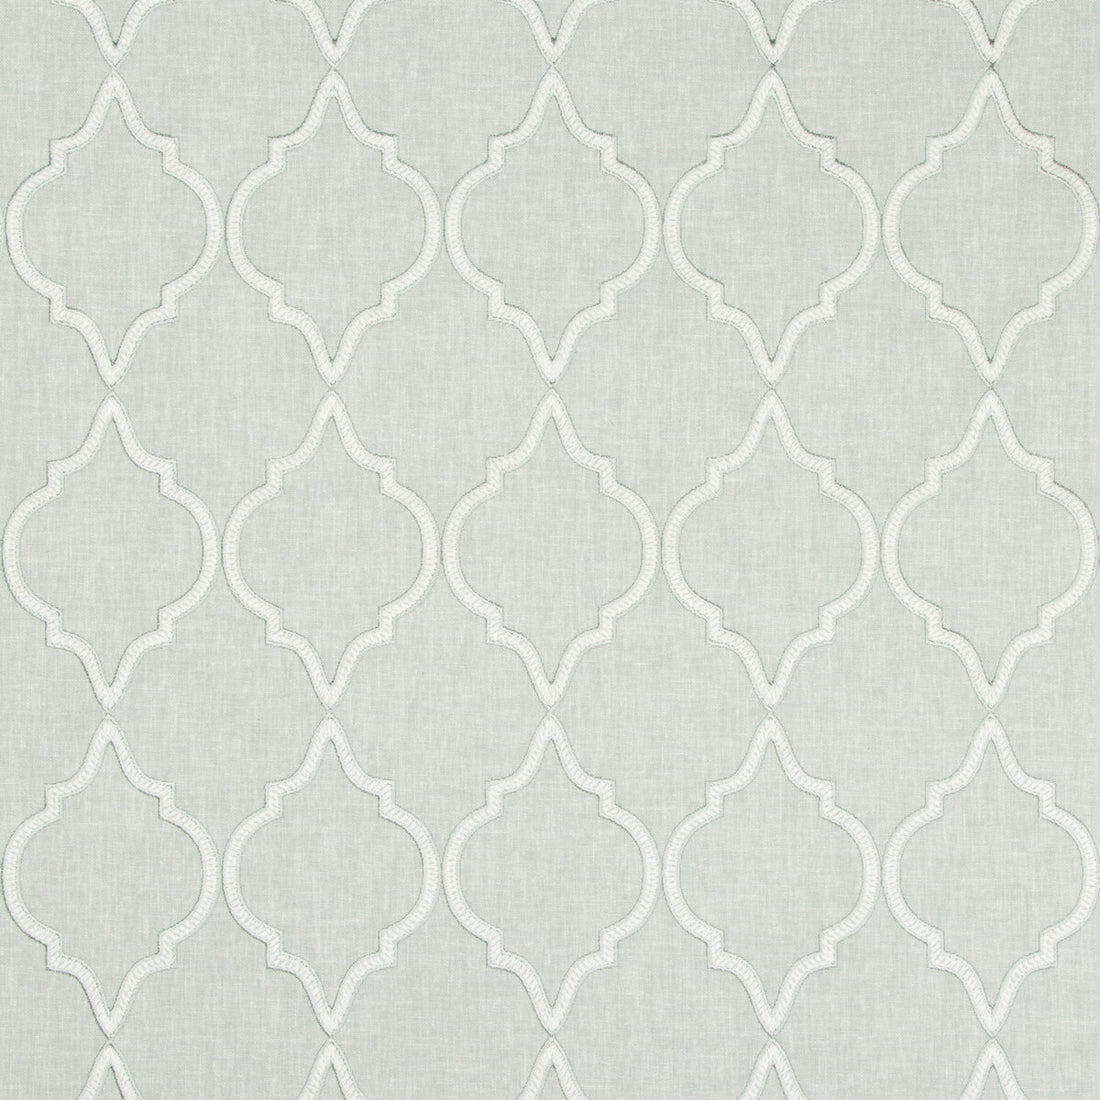 Highhope fabric in mineral color - pattern 35301.11.0 - by Kravet Basics in the Greenwich collection